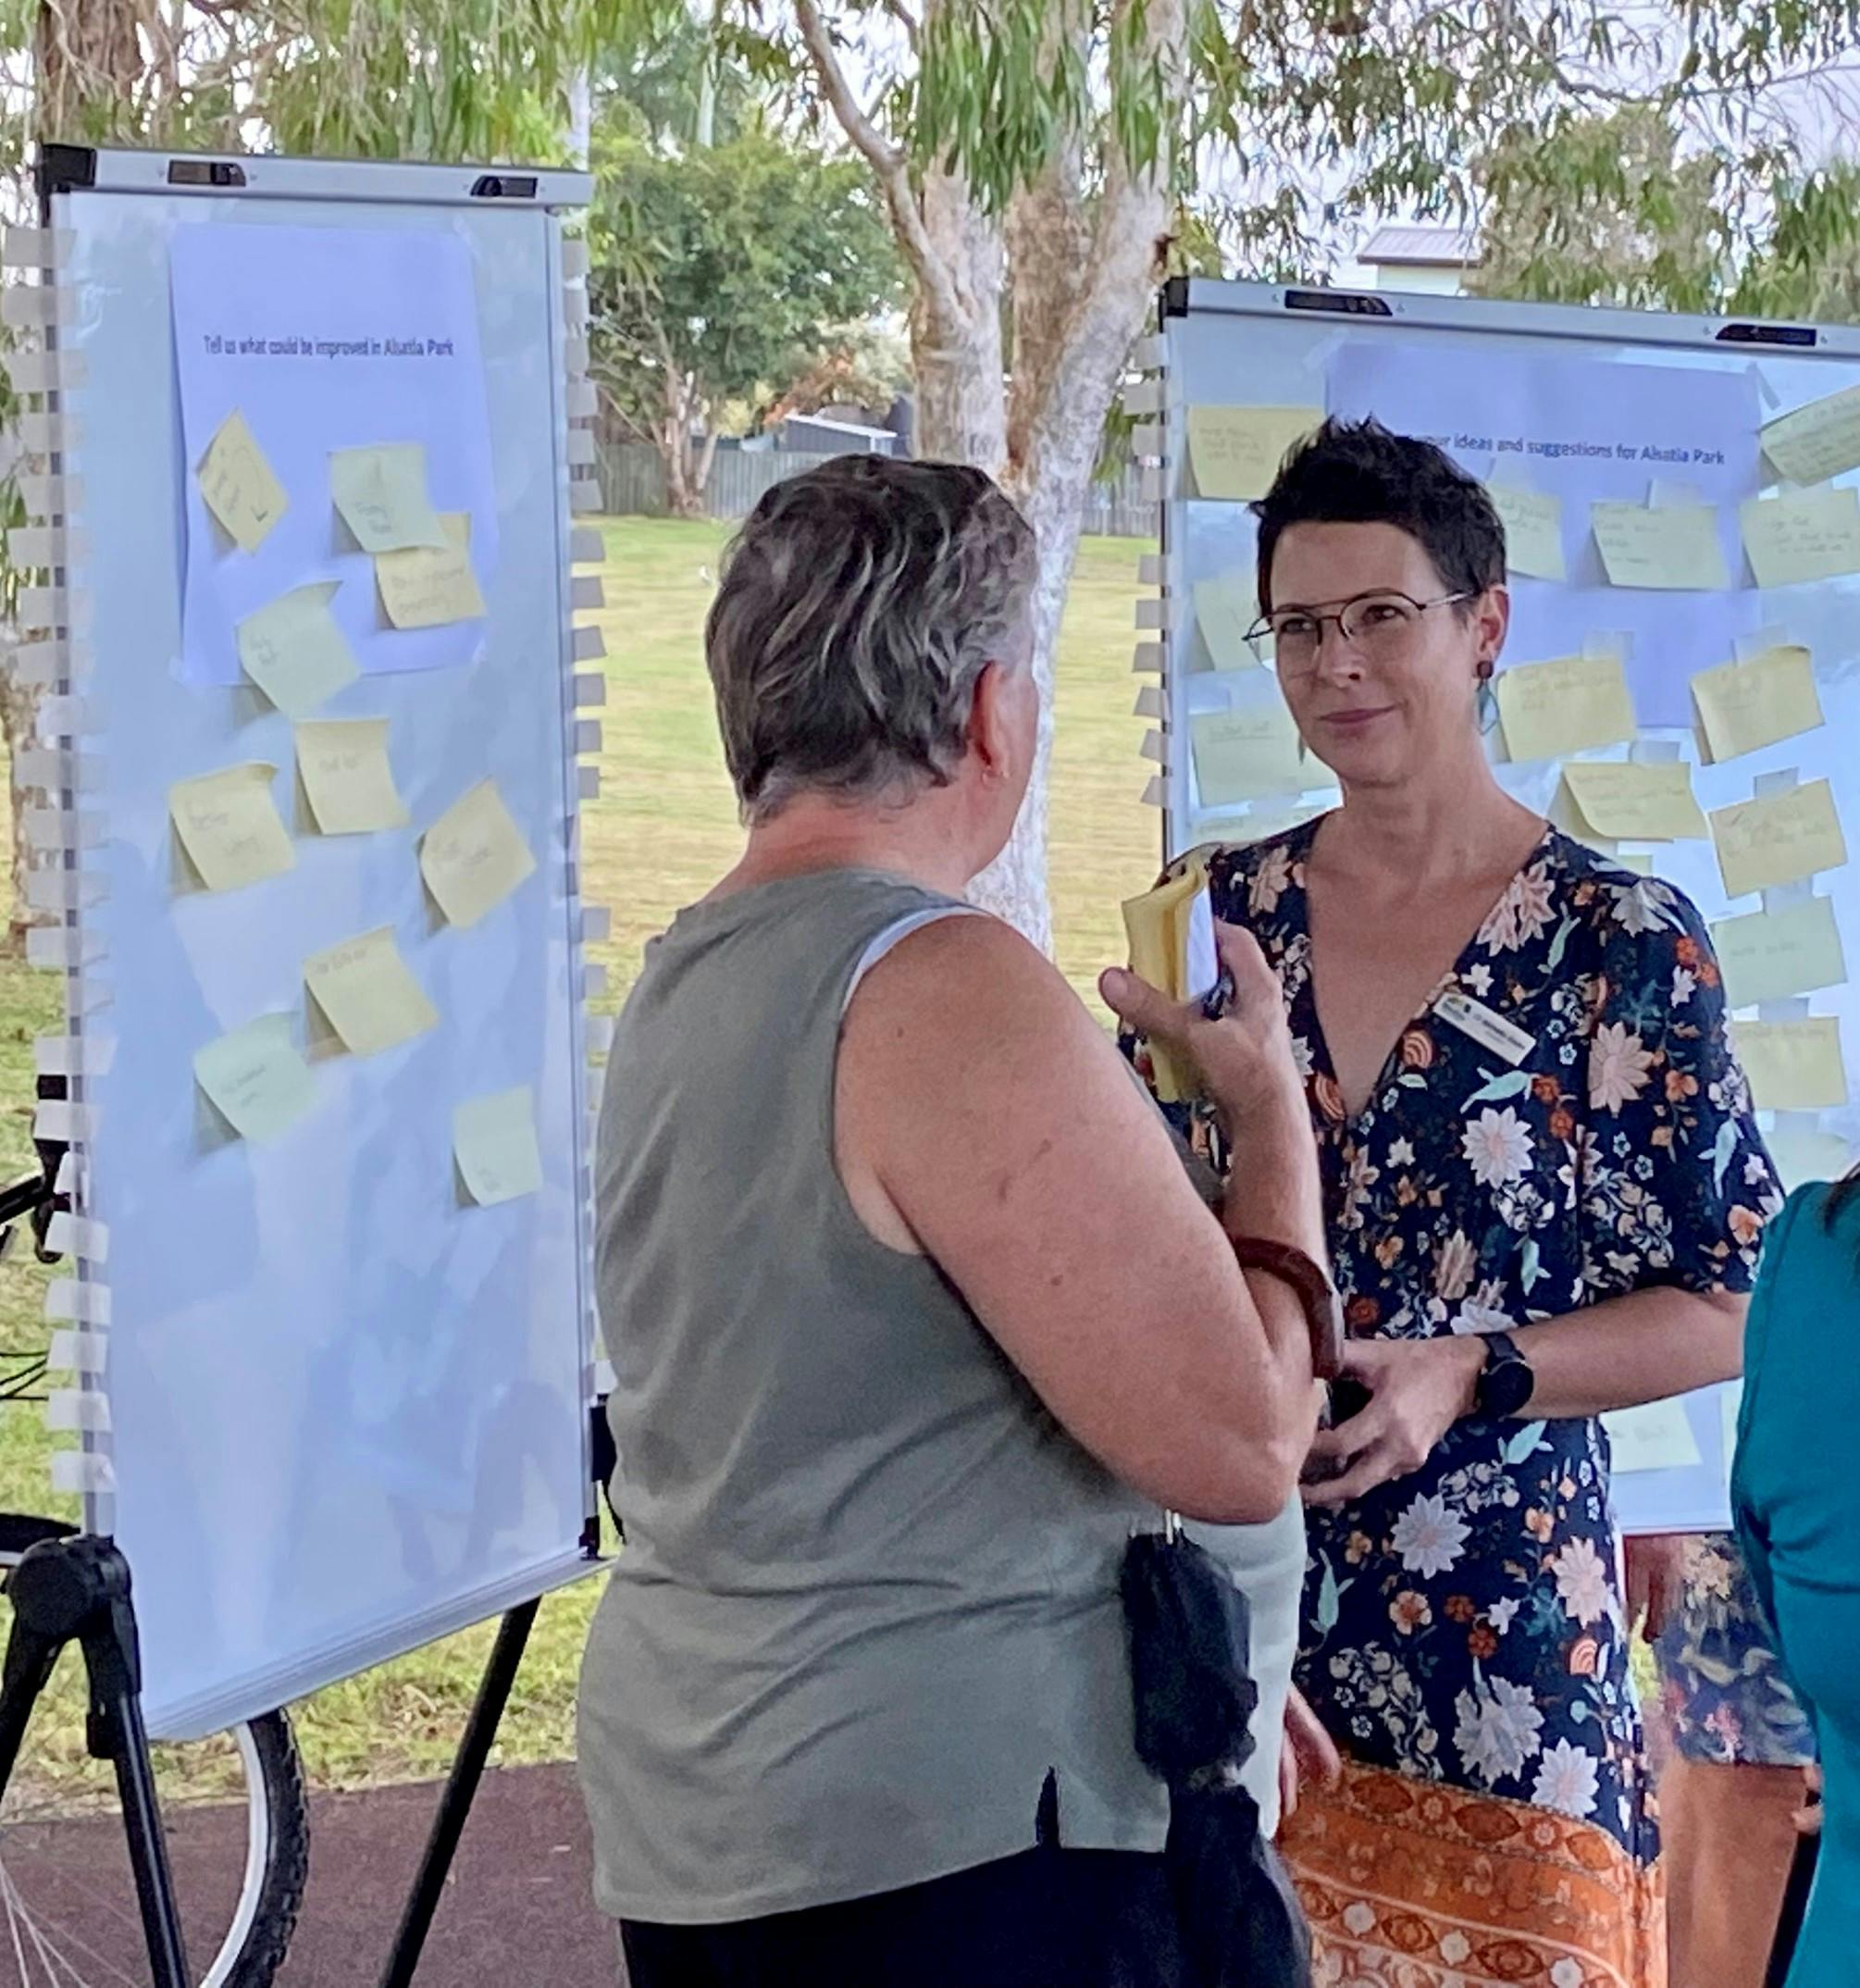 Councillor Michelle Green talks with a local resident about her ideas for improvements at the Alsatia Park consultation session.